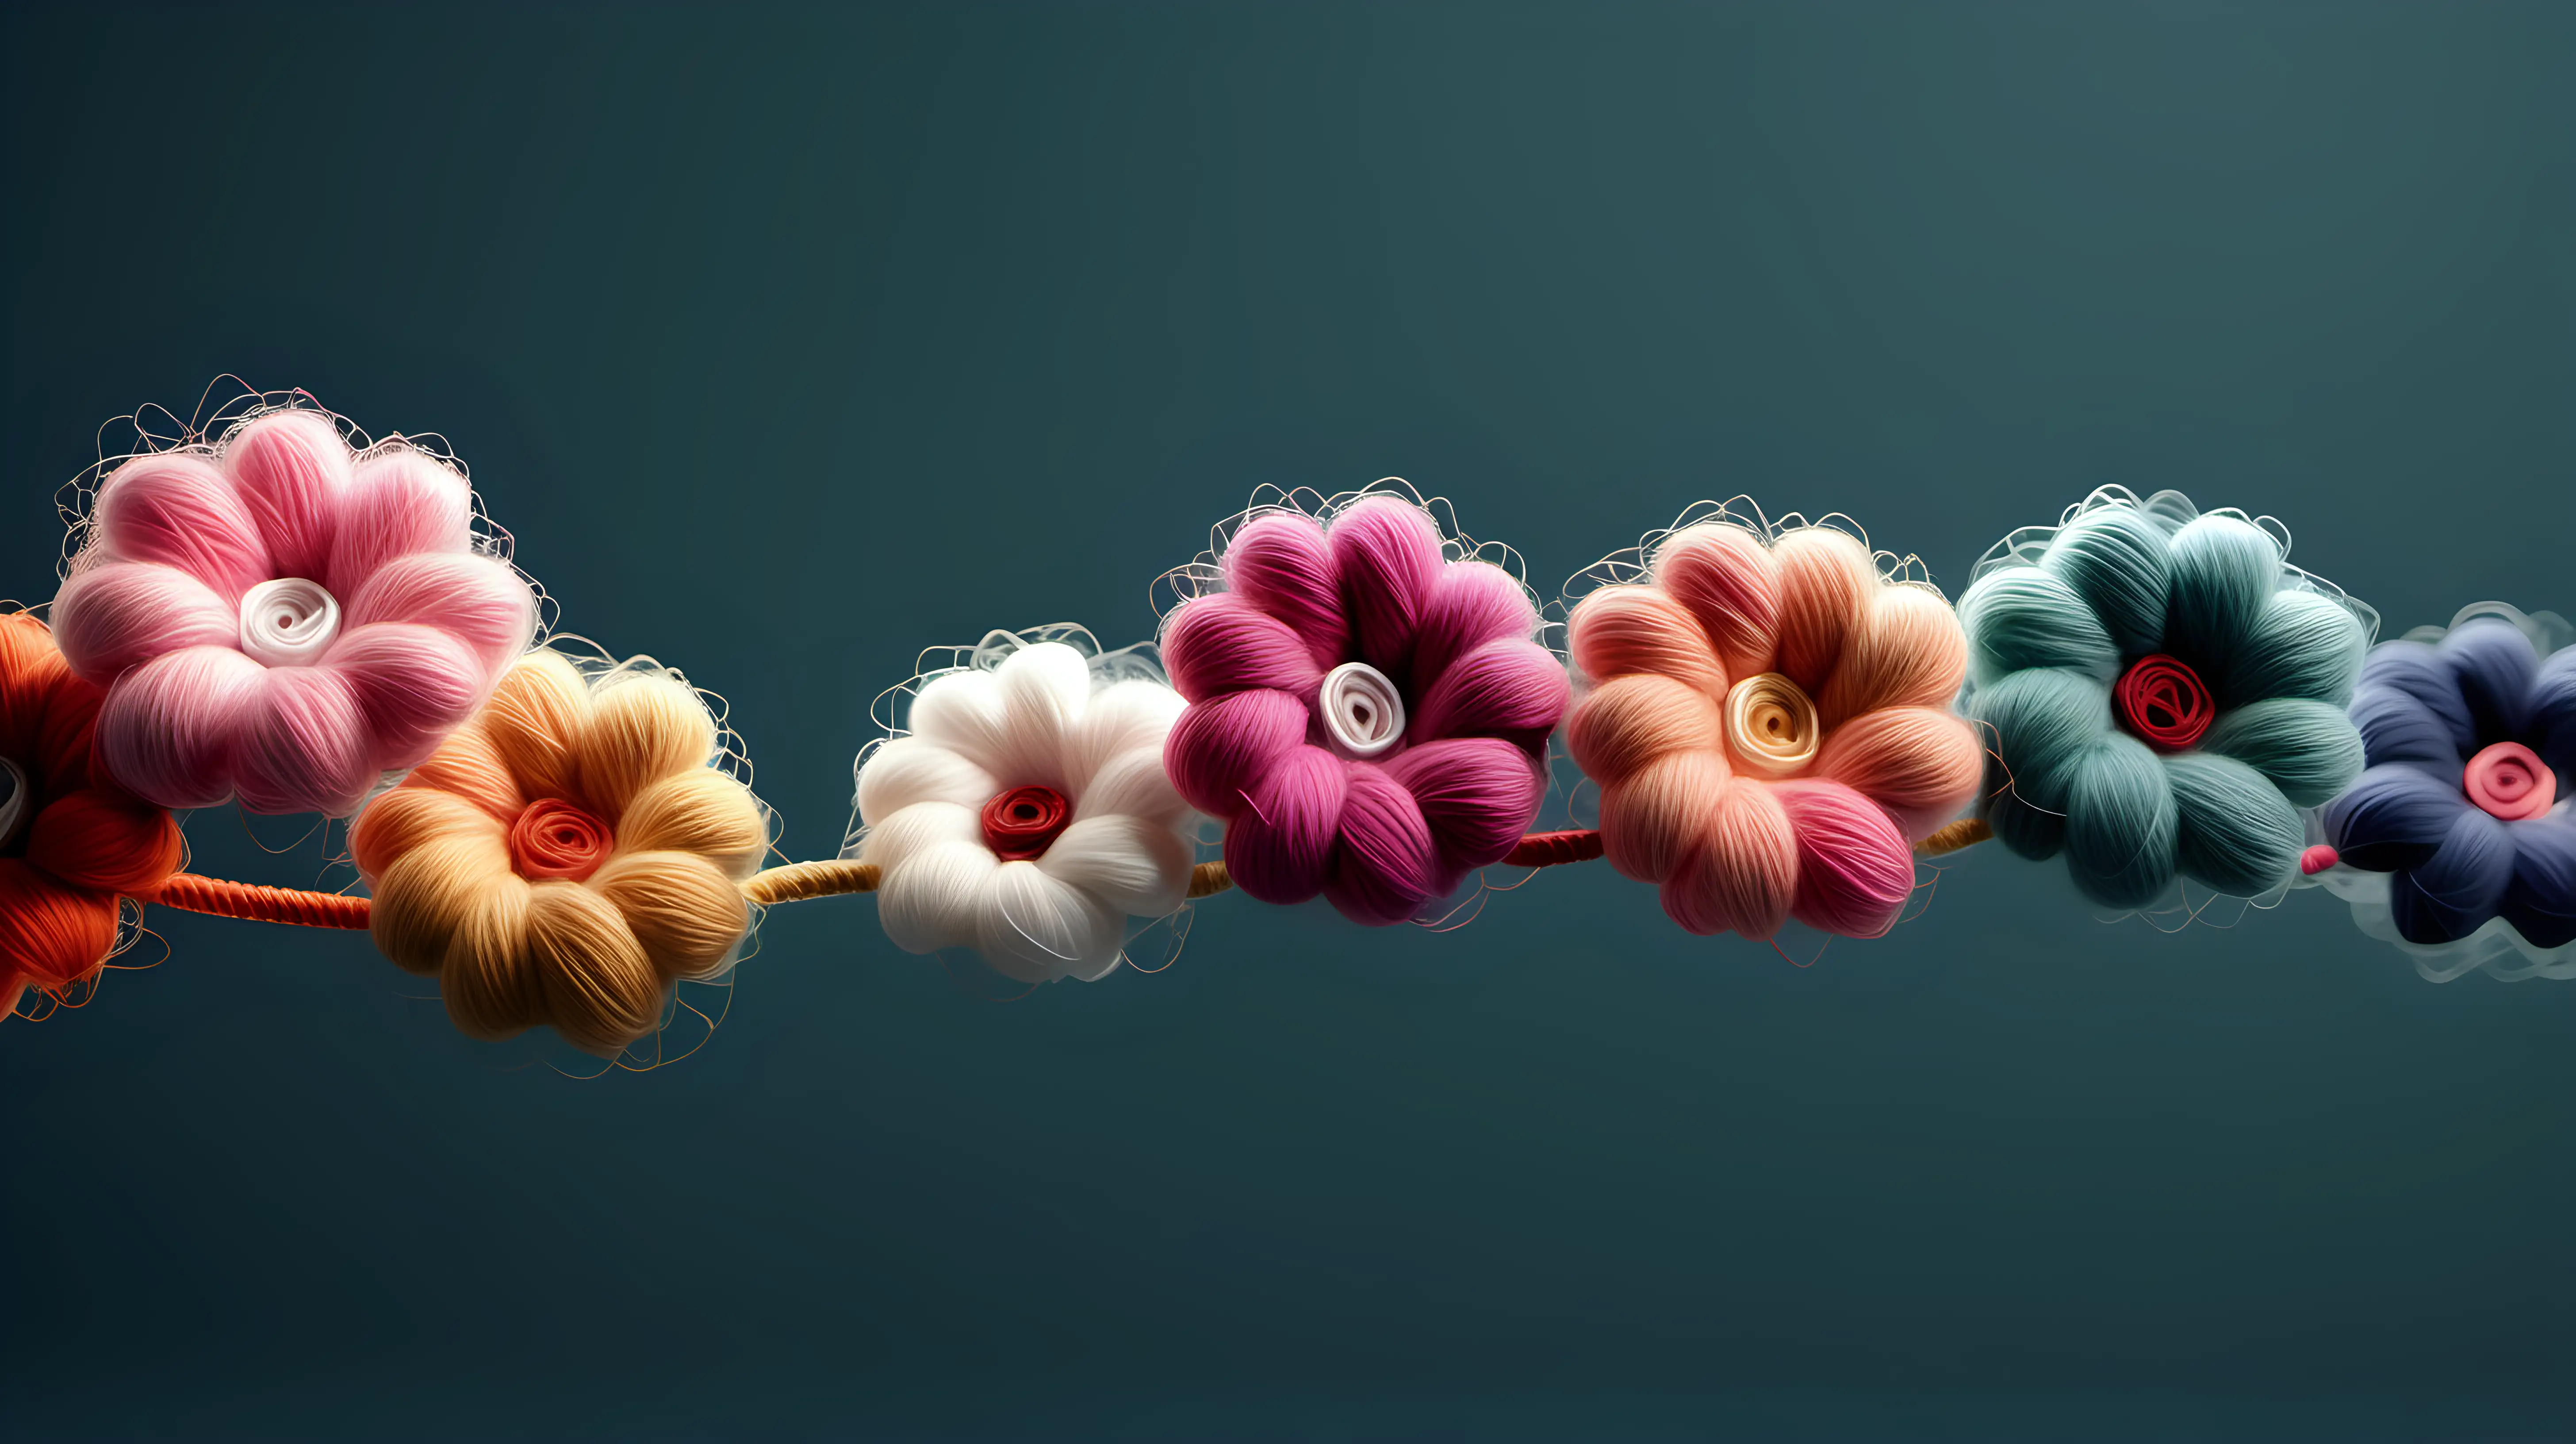  isolated fuzzy, Woolen thread flowers with serpentine thread, thread floating in 3d perspective, realistic, curvy, lots of yarn threads flying  at you